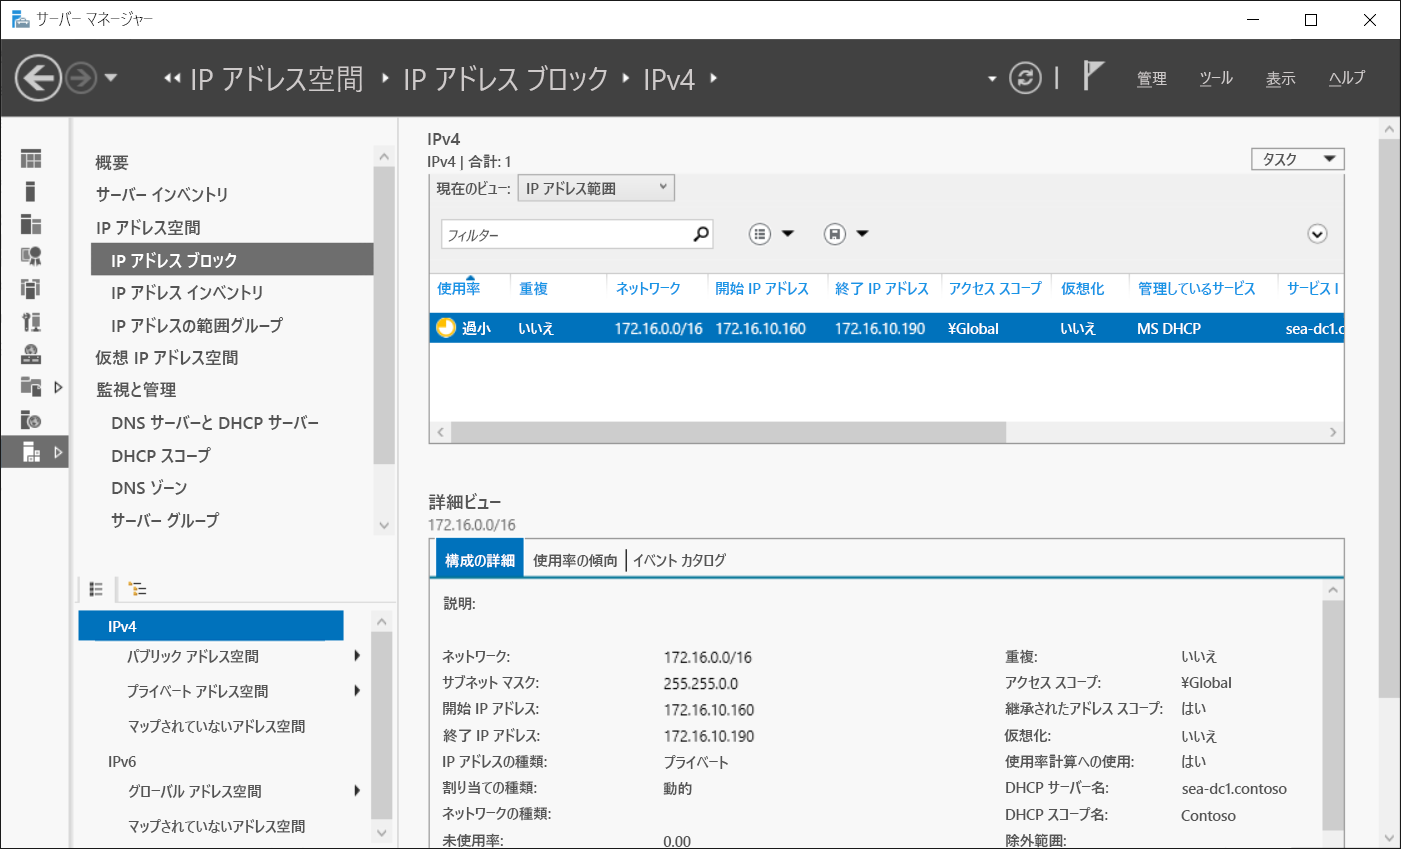 A screenshot of the IPAM IP address space pane in Server Manager. The administrator has selected the IP Address Blocks tab for IPv4. In the details pane, the network 172.16.0.0/16 subnet is selected.